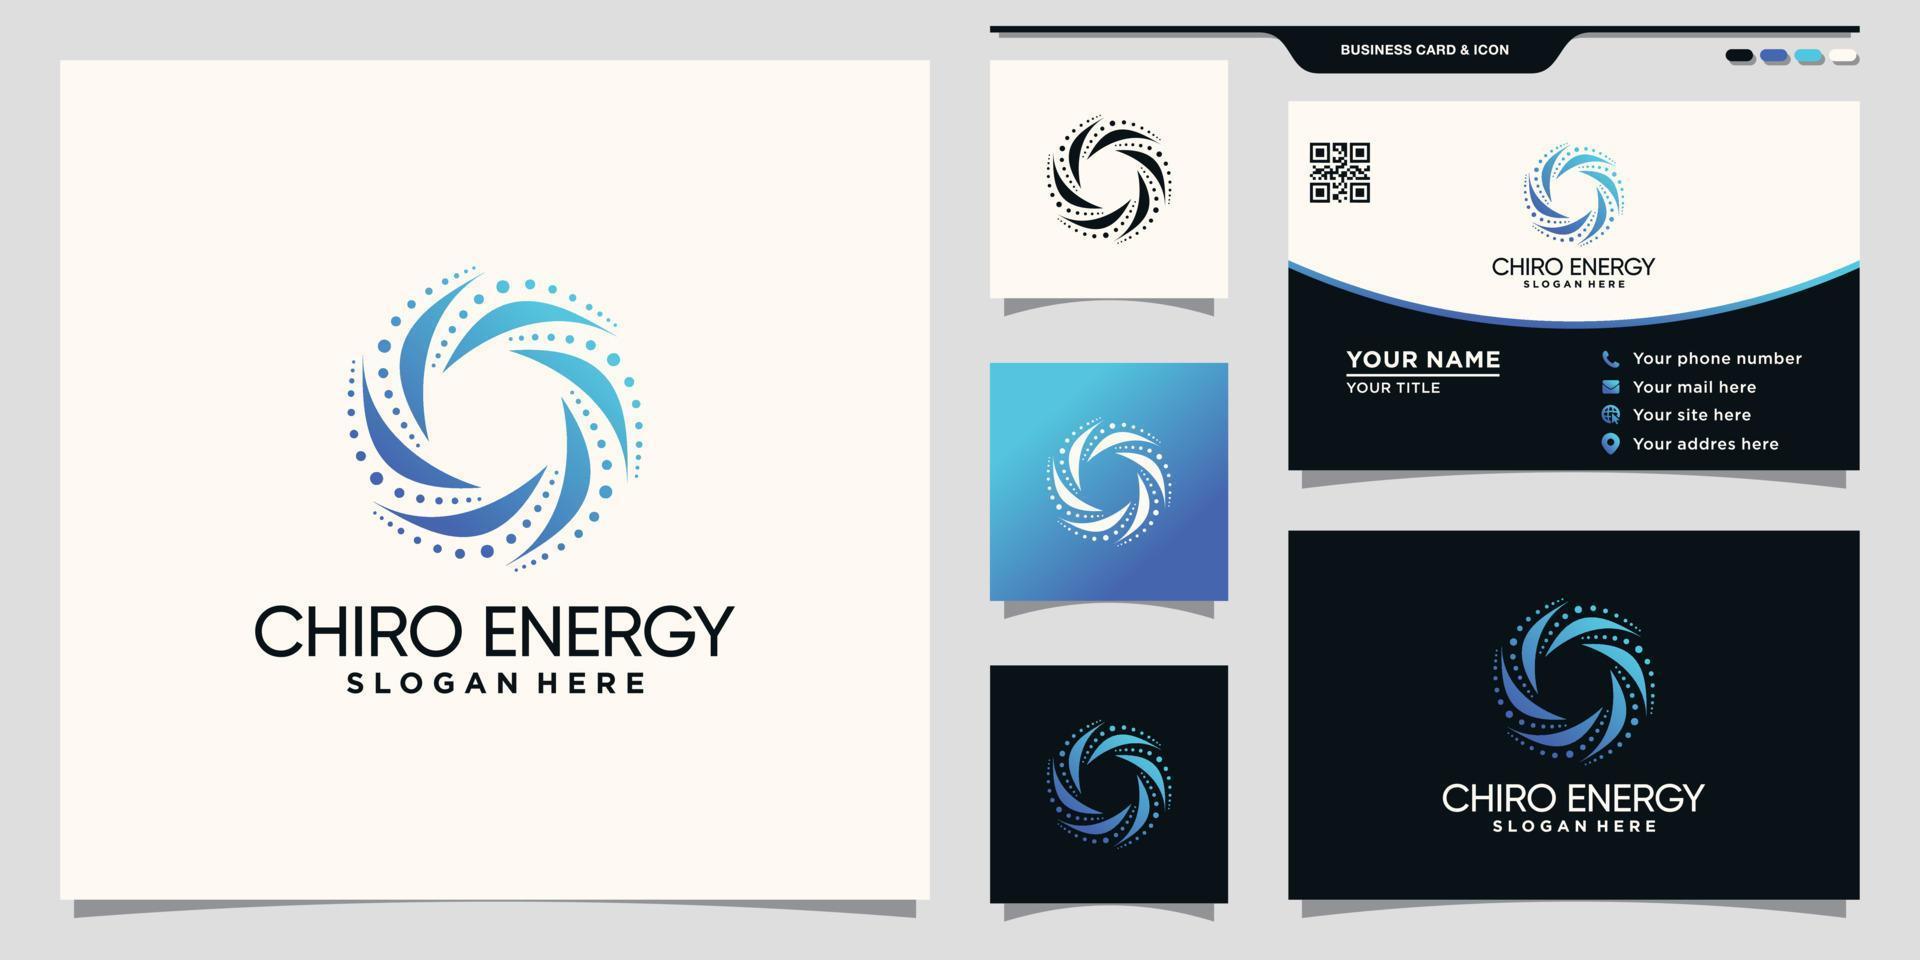 Creative chiro energy logo with unique concept and business card design Premium Vector